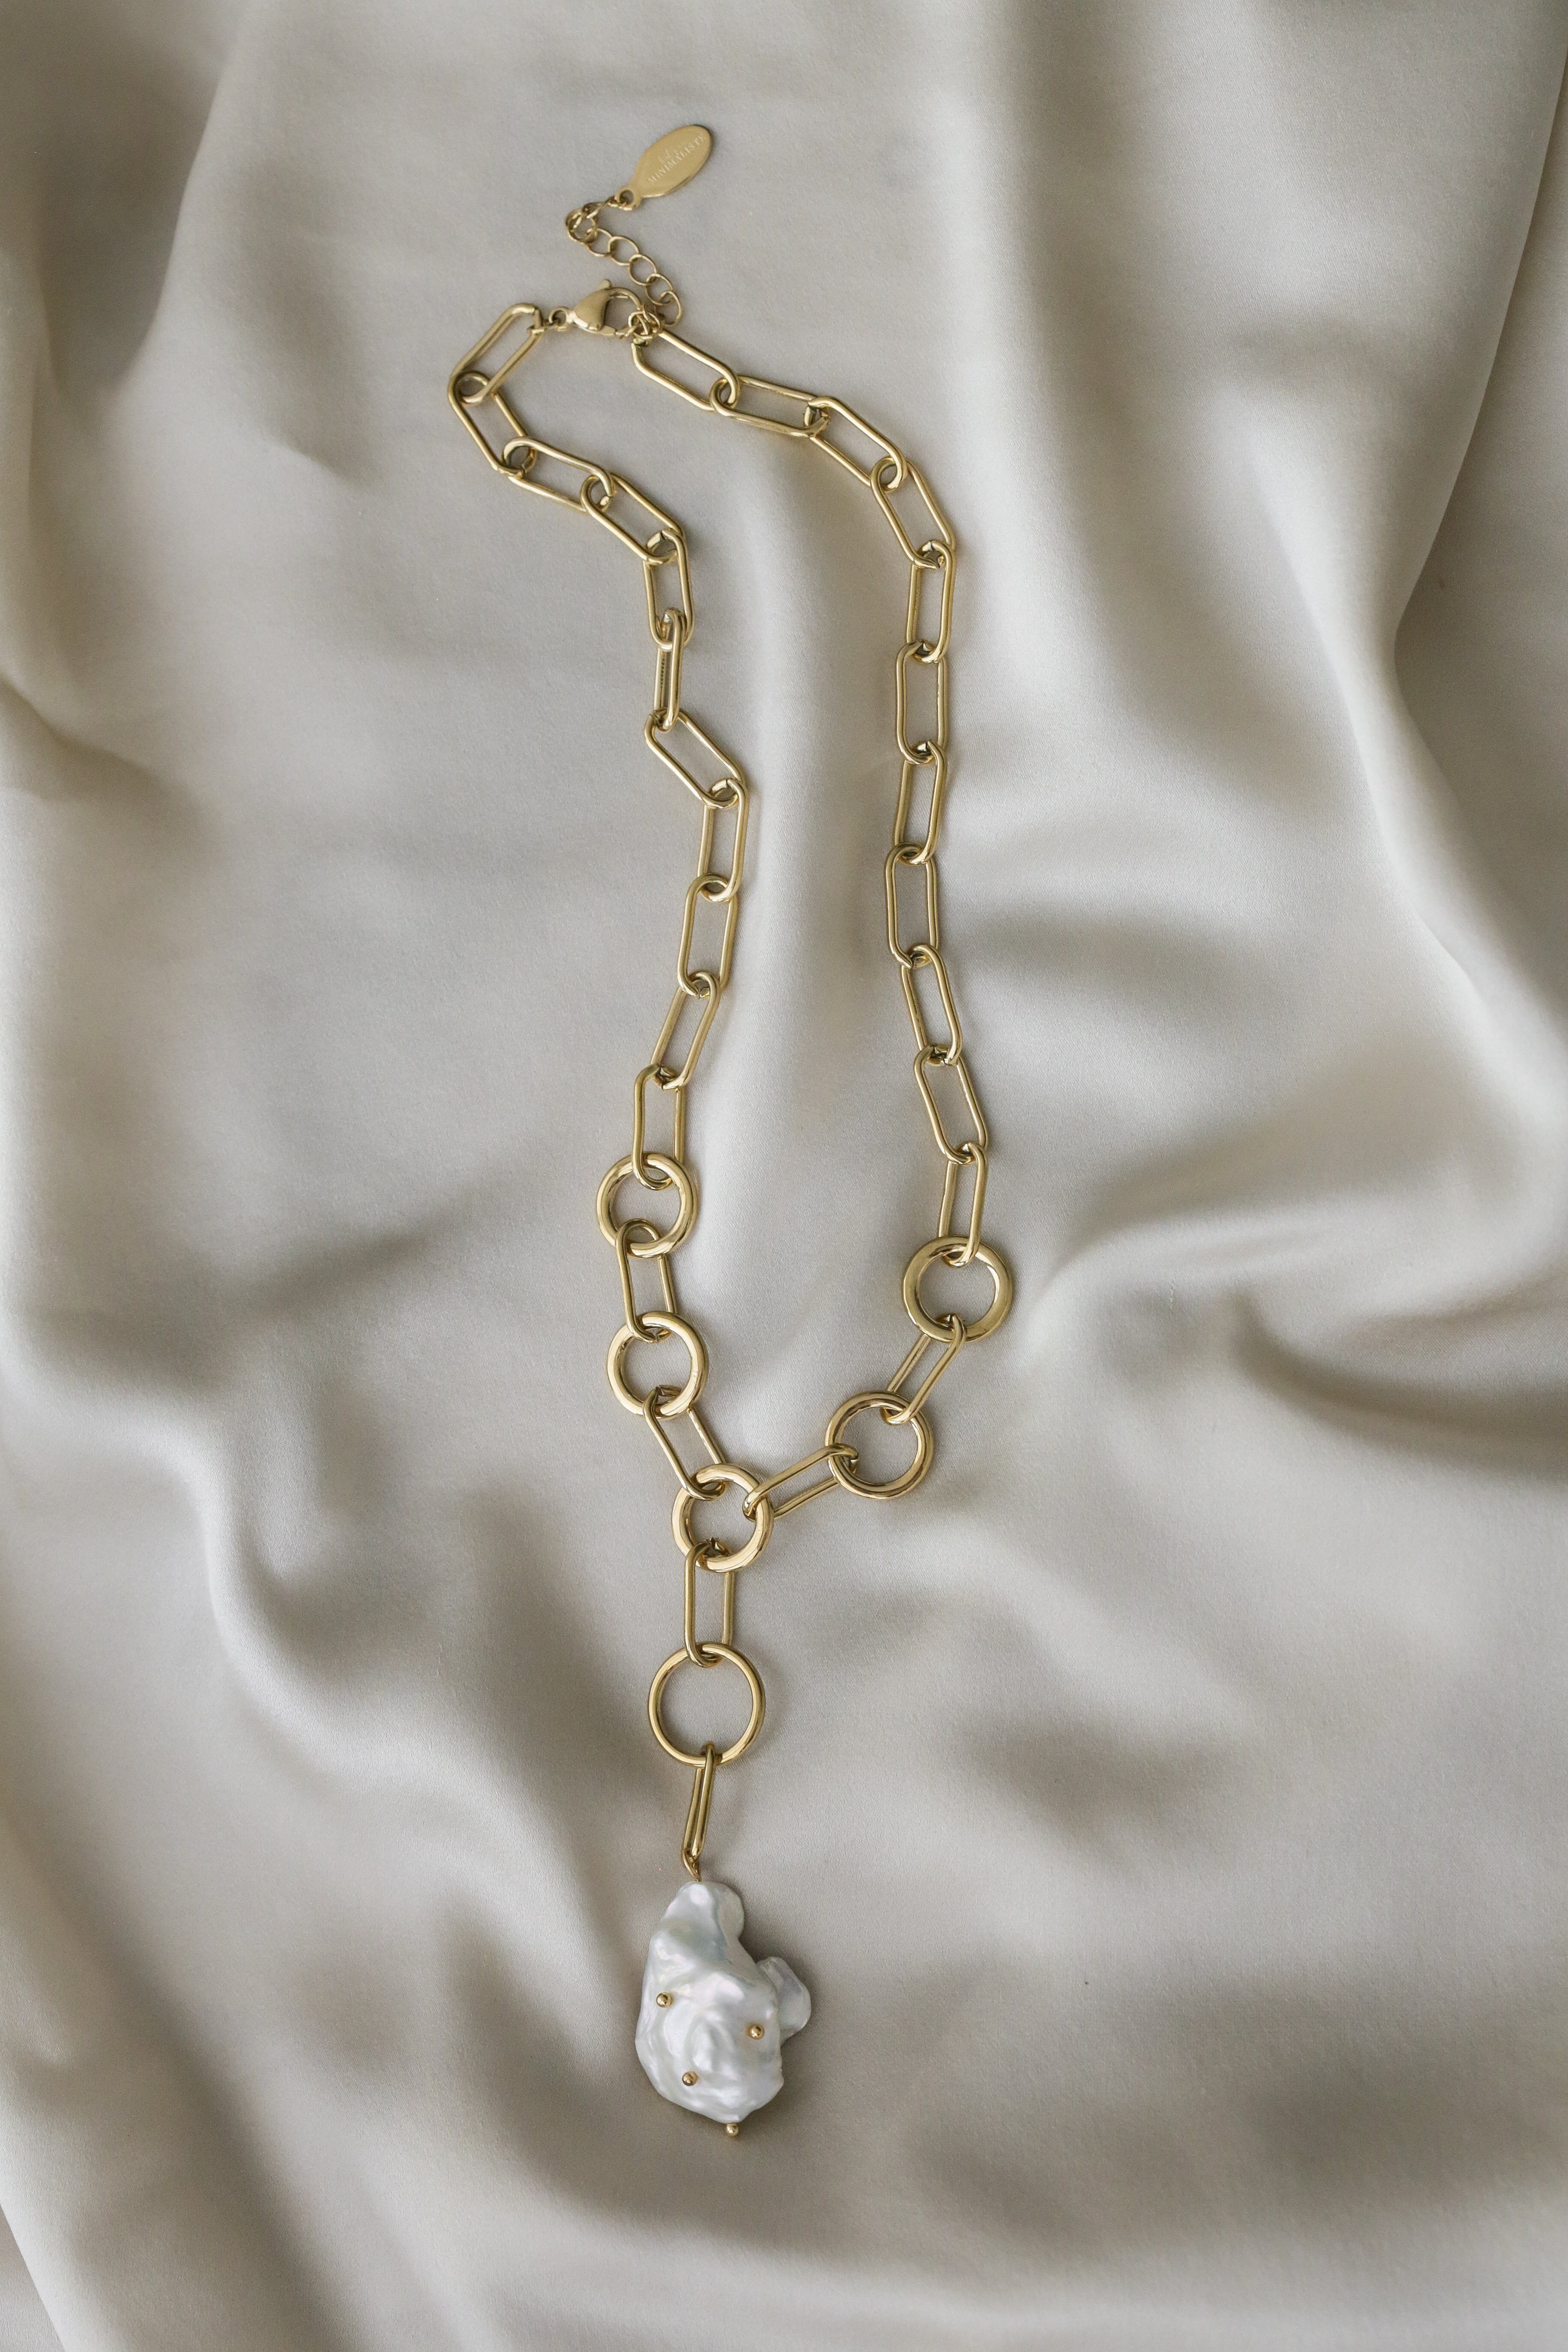 Xaria Necklace - Boutique Minimaliste has waterproof, durable, elegant and vintage inspired jewelry